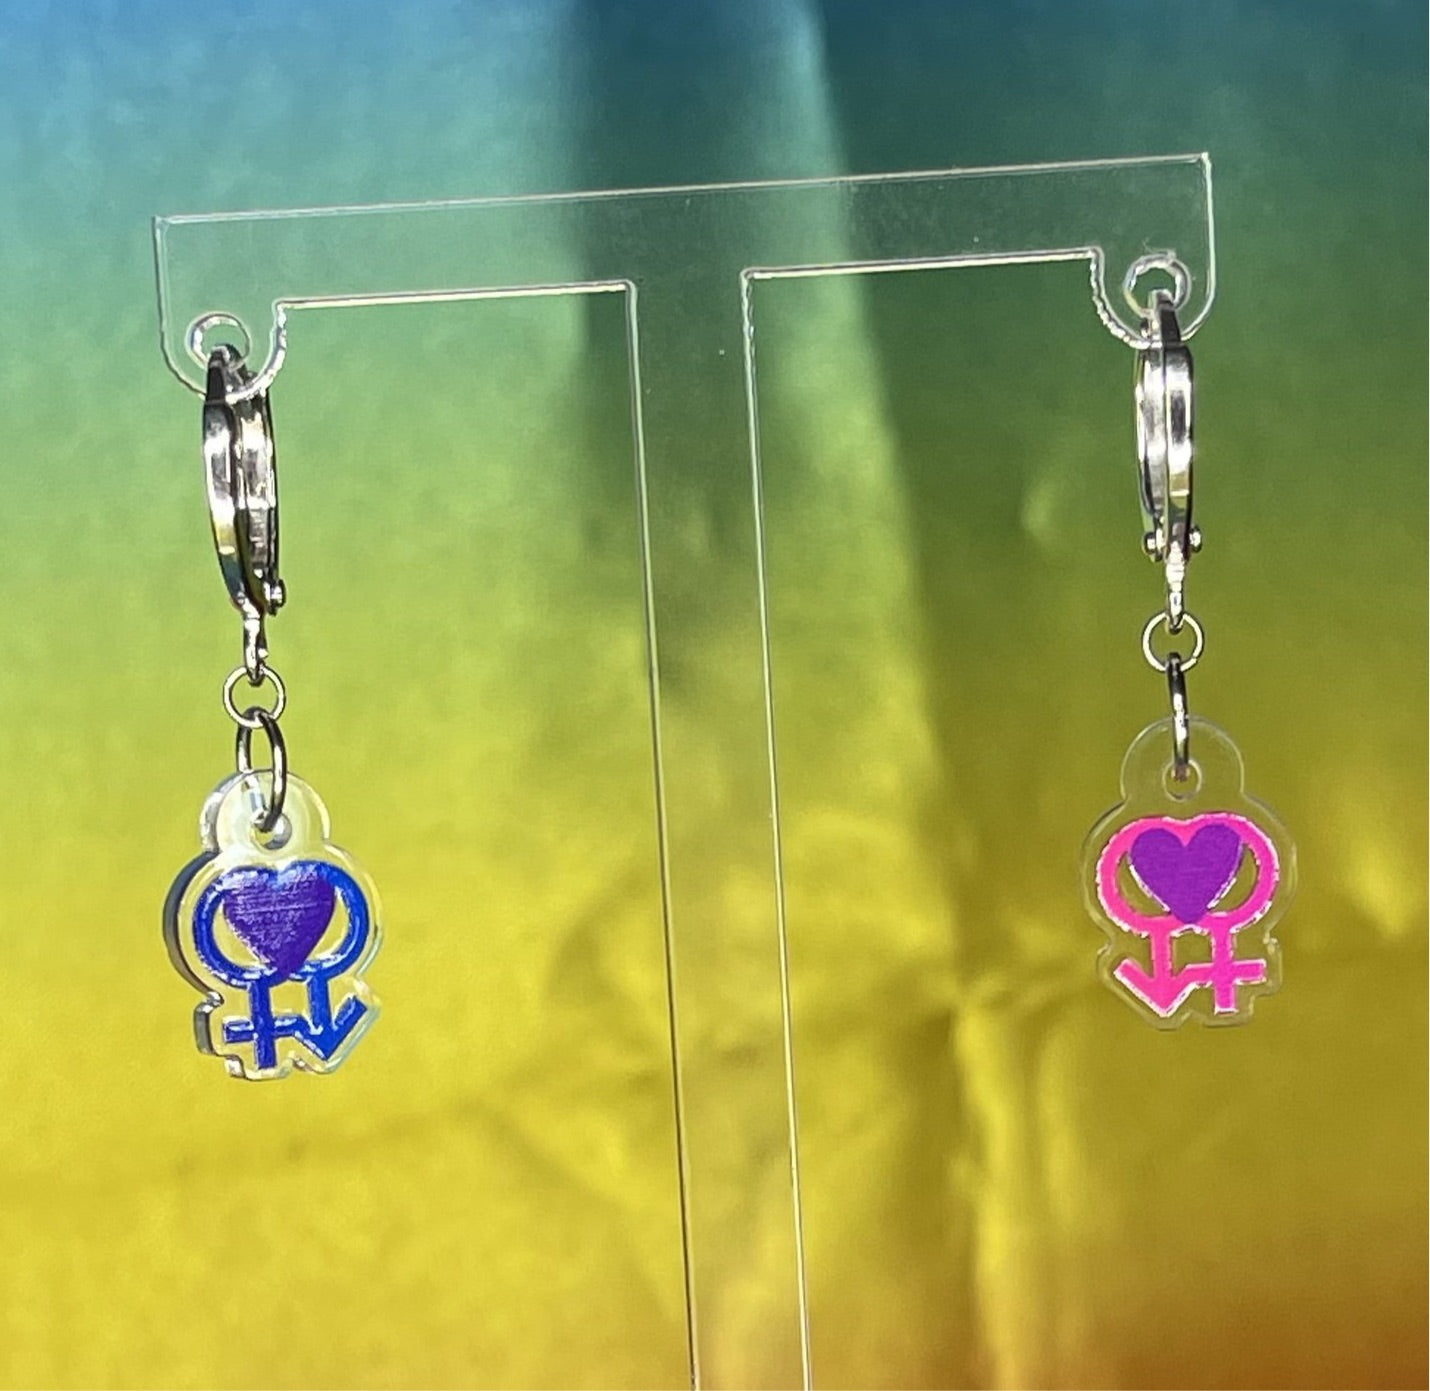 Bisexual Pride Flag Inspired Earrings - Lxyclr Authentic